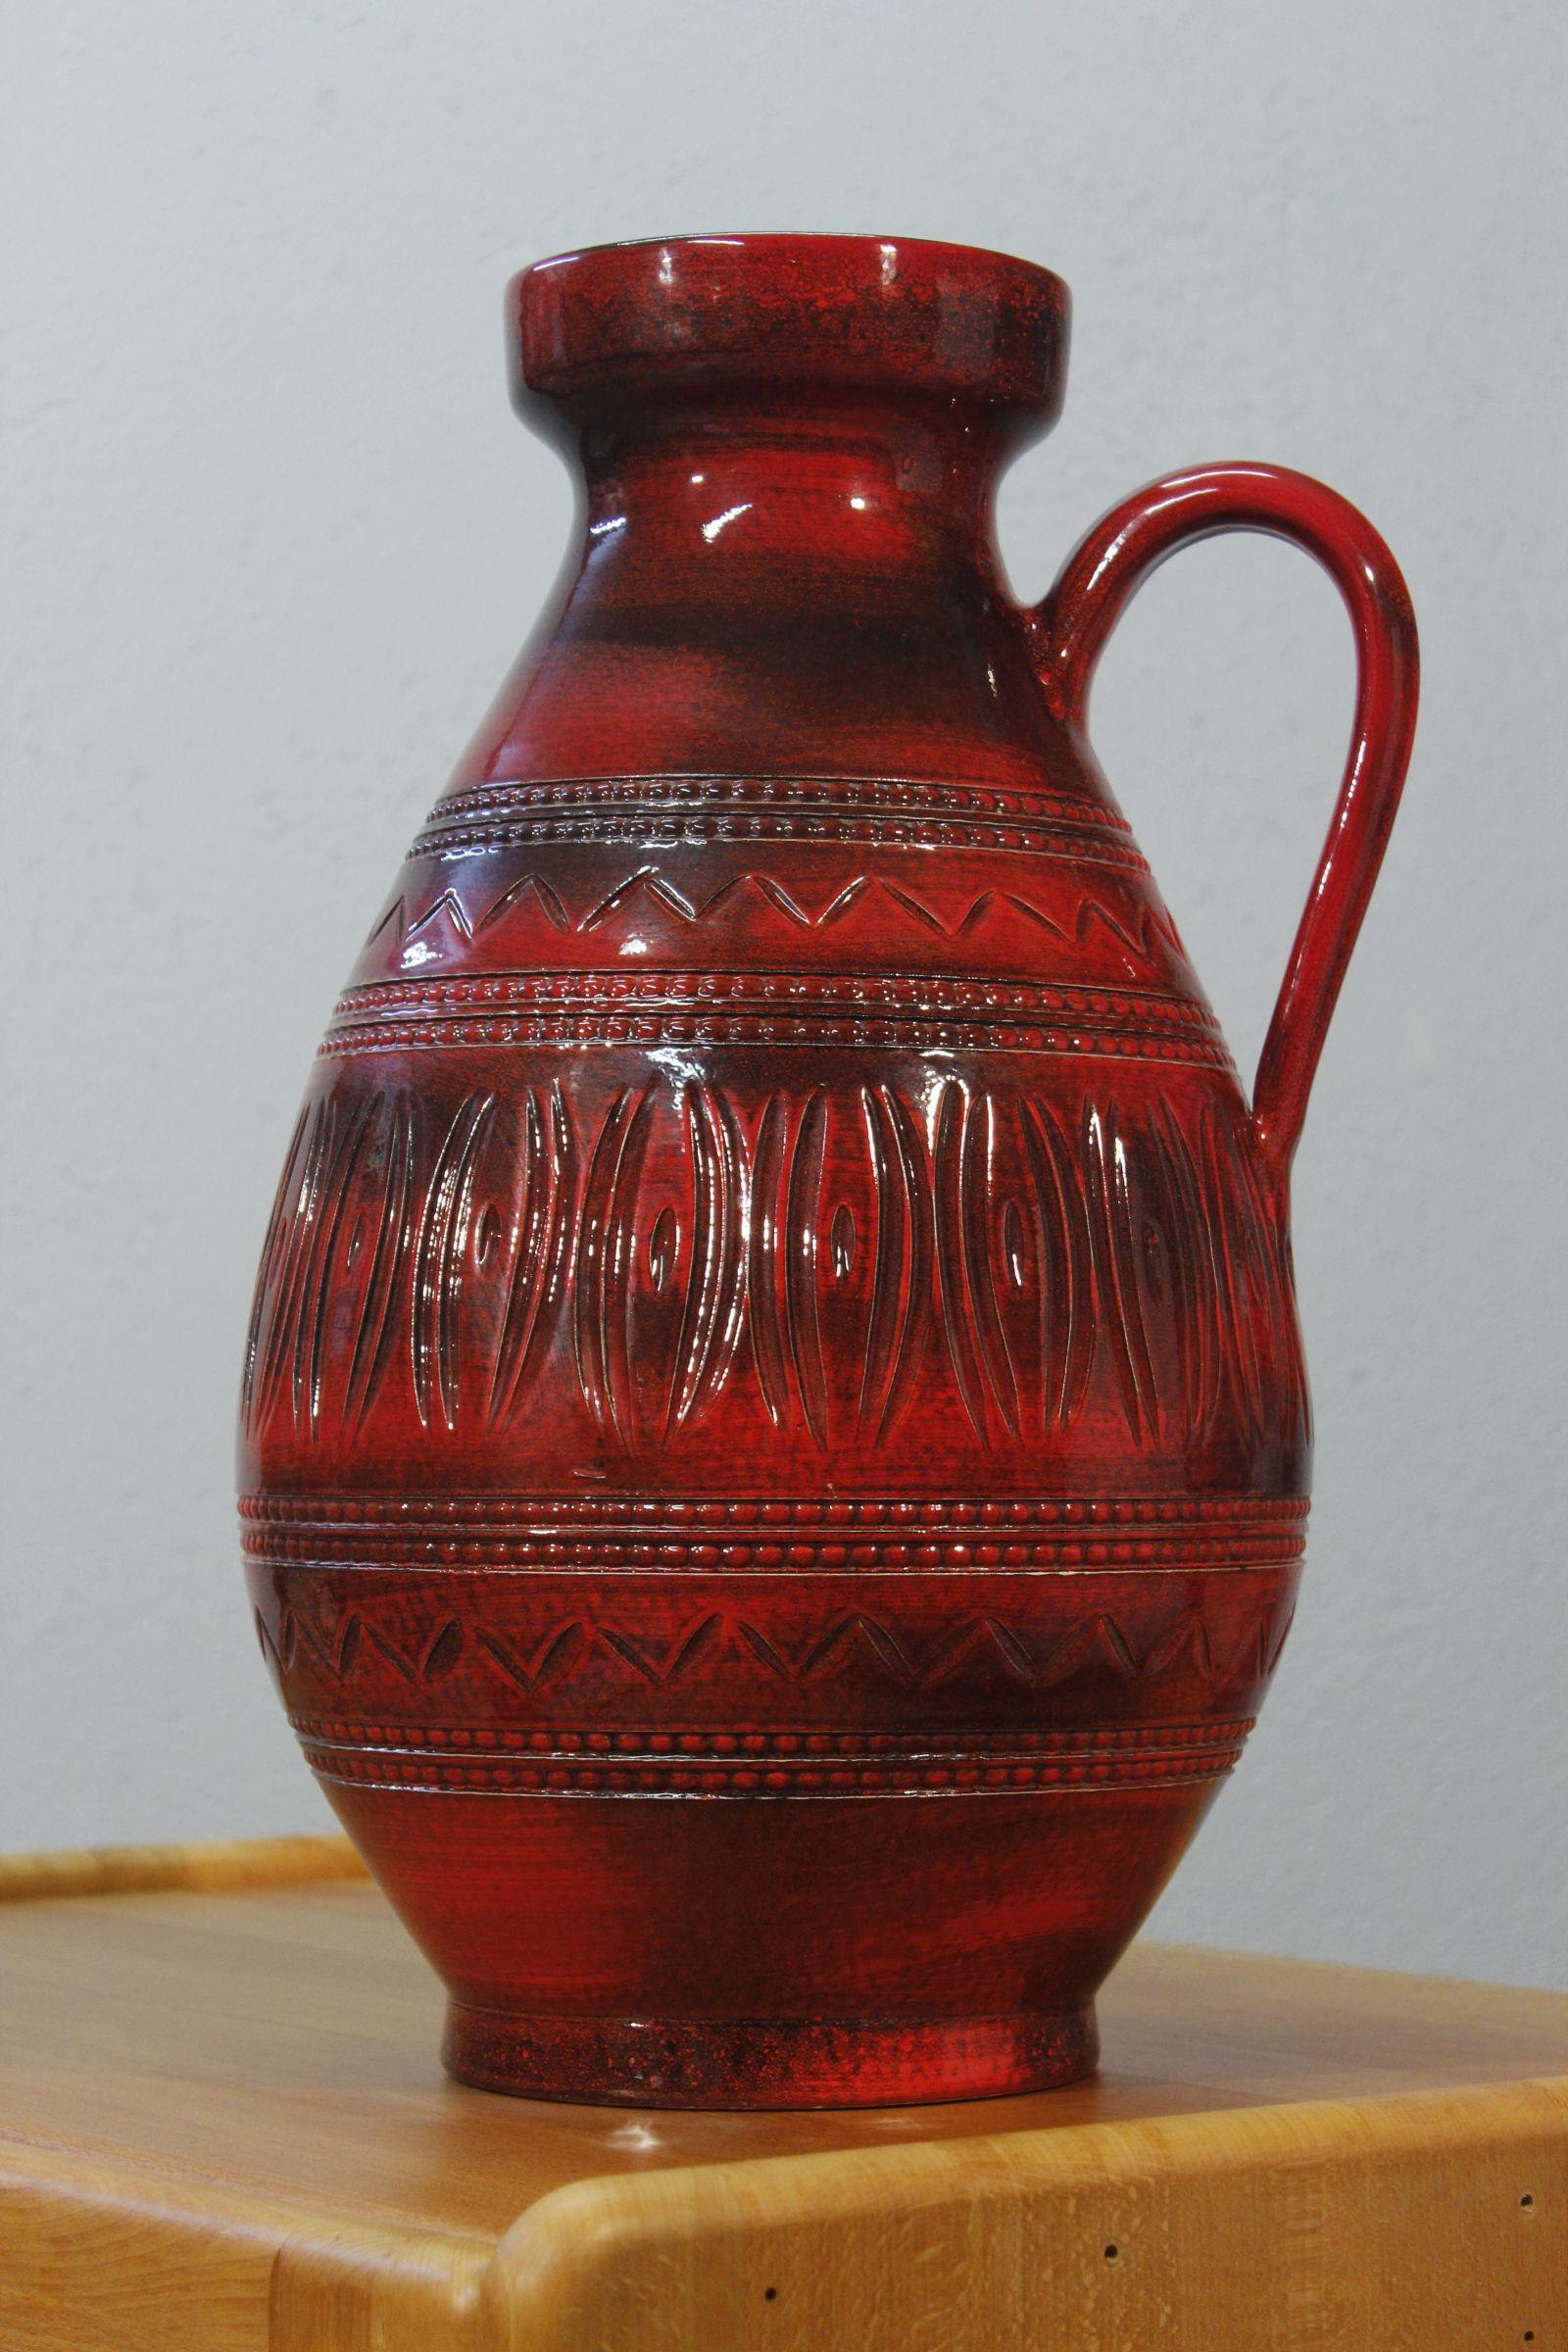 Ilkra Edel Keramik large floor vase with handle, with scarified patterns and a deep red & black enamel. 

In great overall condition